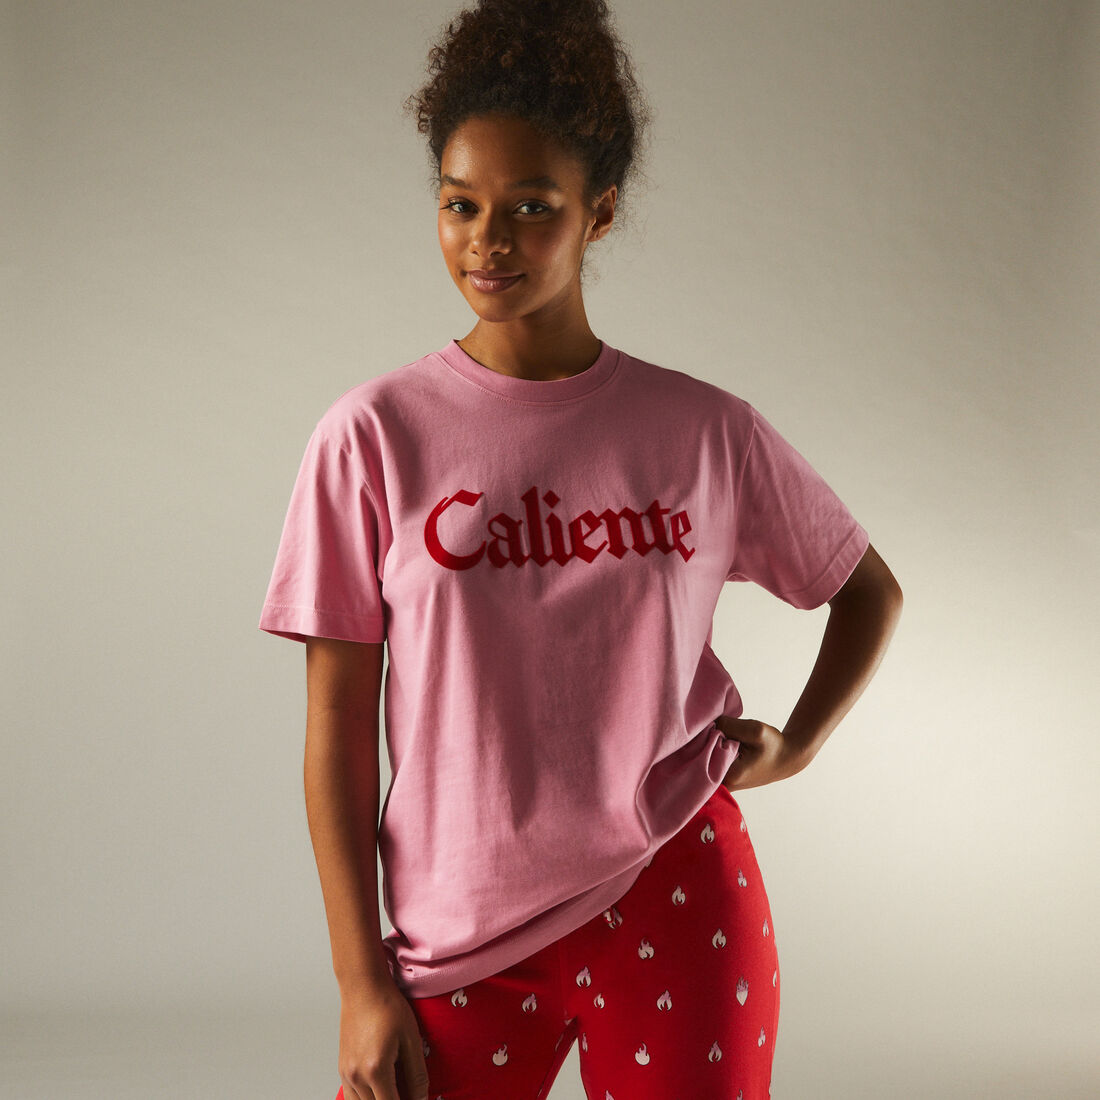 t-shirt with "caliente" print;